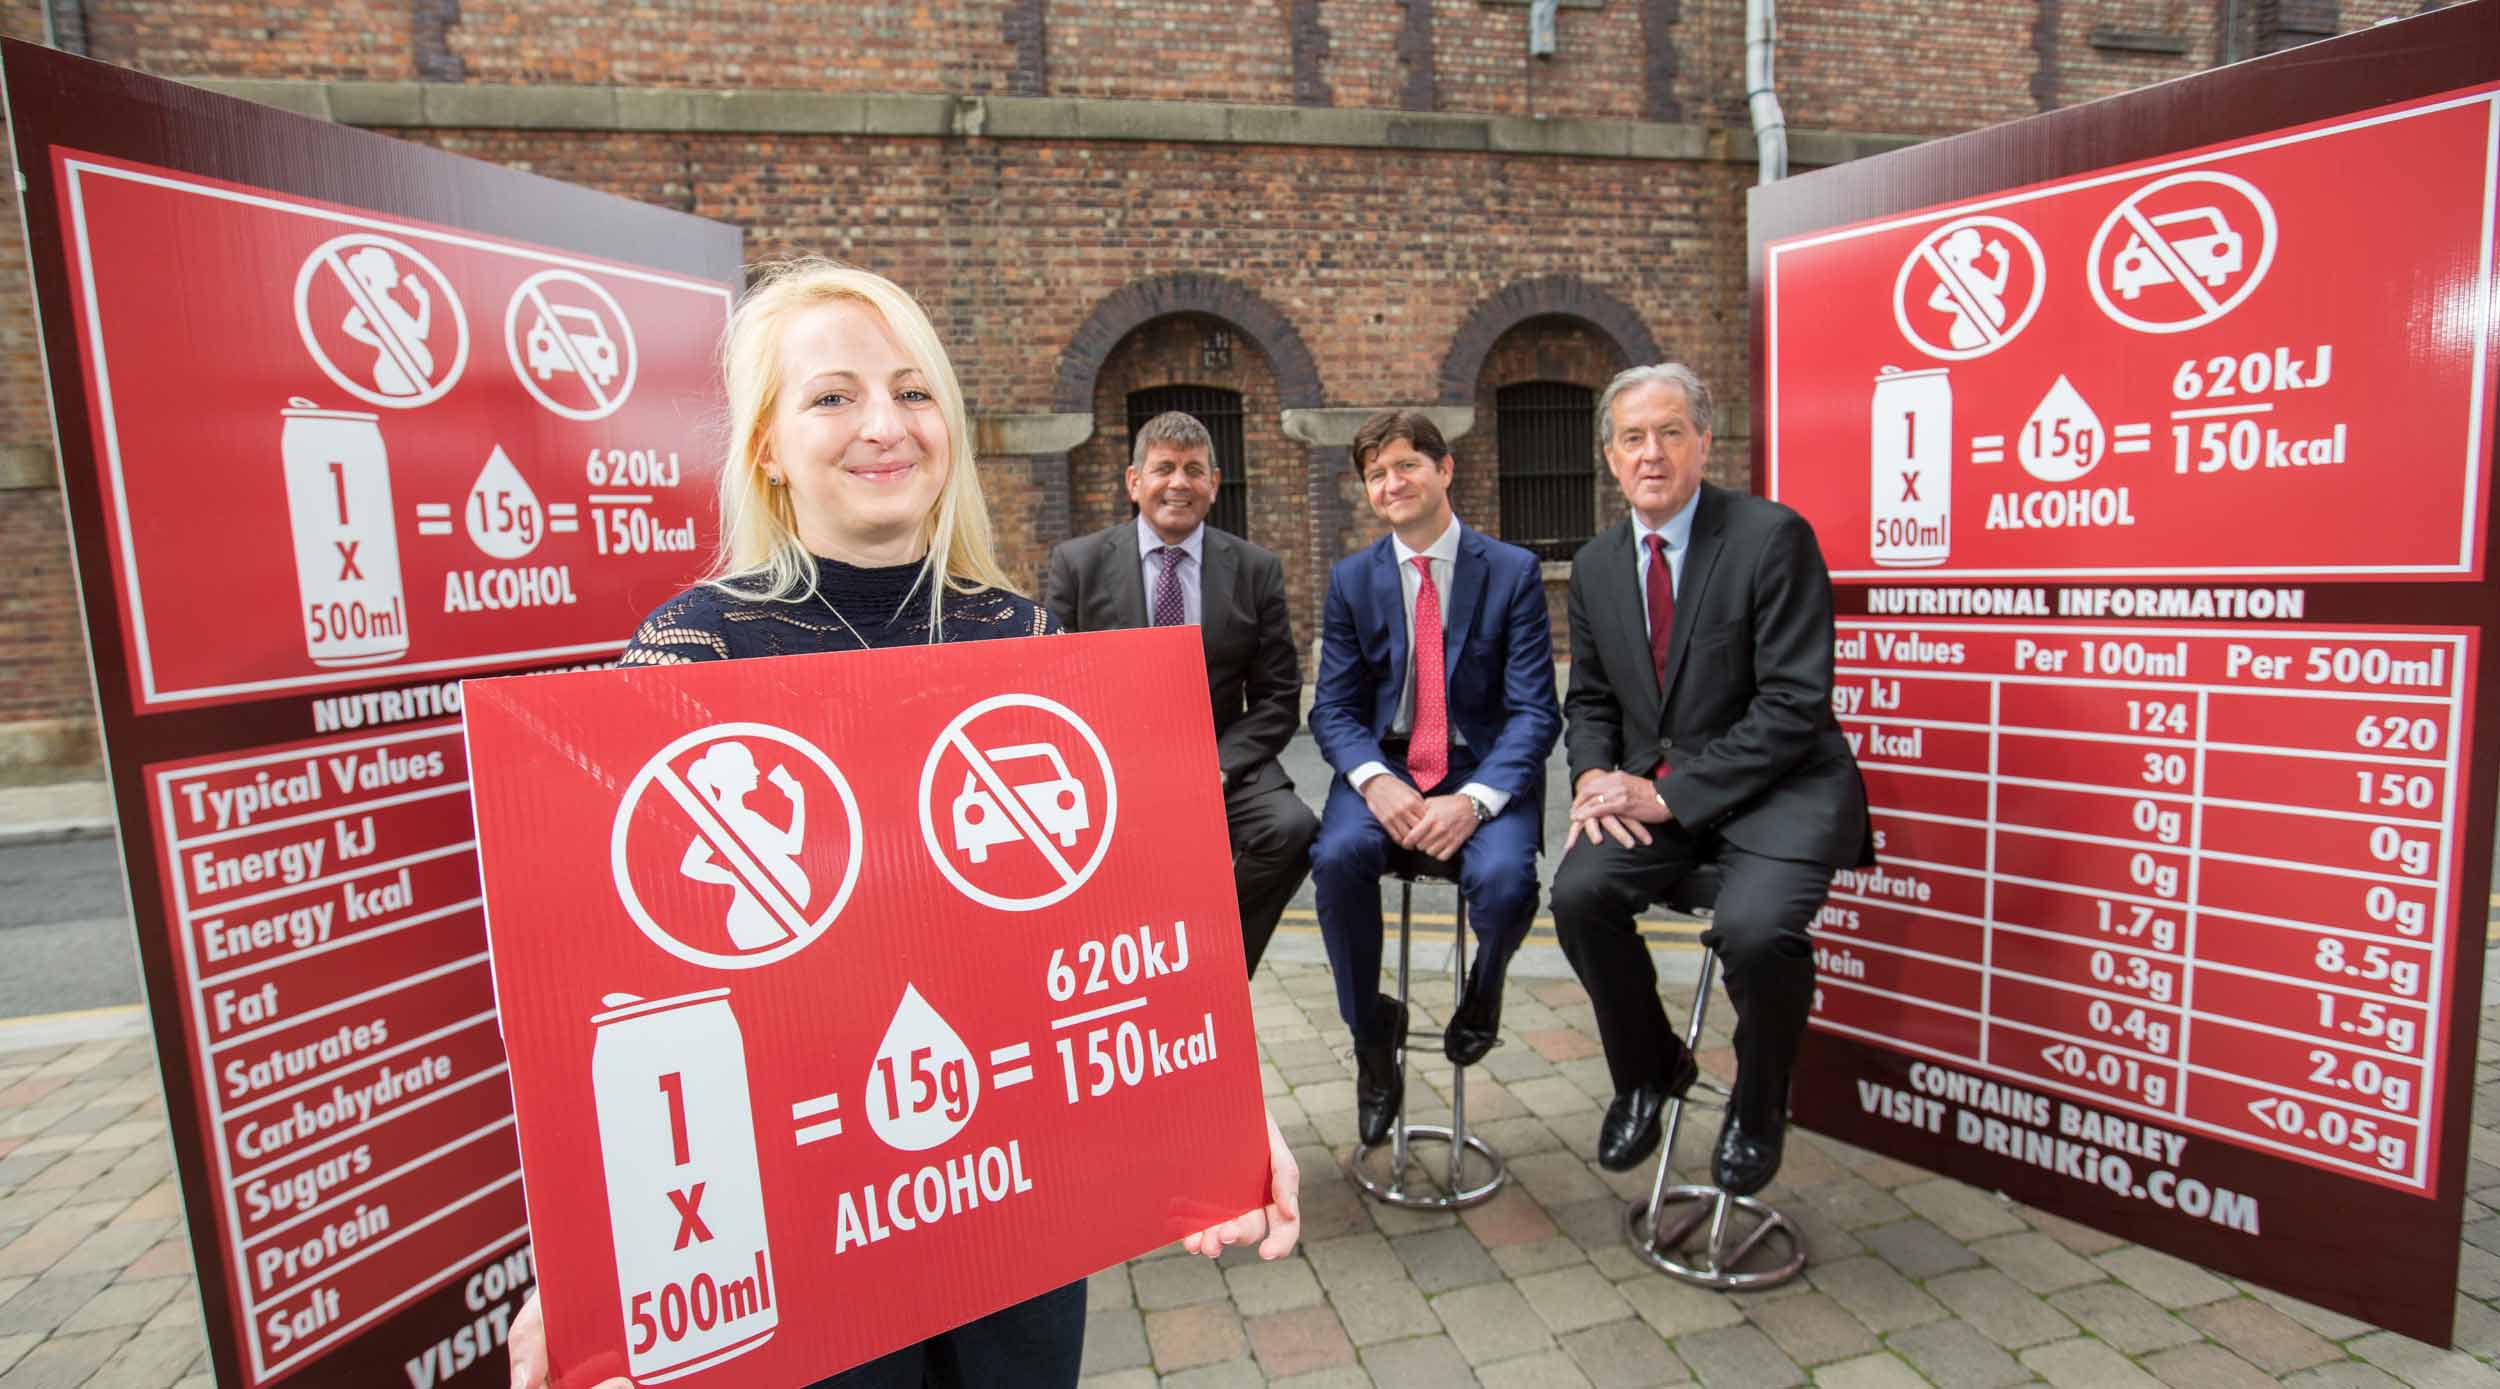 At the launch of Diageo Ireland’s new labelling standards (from left): Smithwicks’ Alexa Wolff, Minister of State at the Department of Agriculture, Food and the Marine Andrew Doyle, Diageo Ireland Country Director Oliver Loomes and Bord Bia Chief Executive Aidan Cotter.